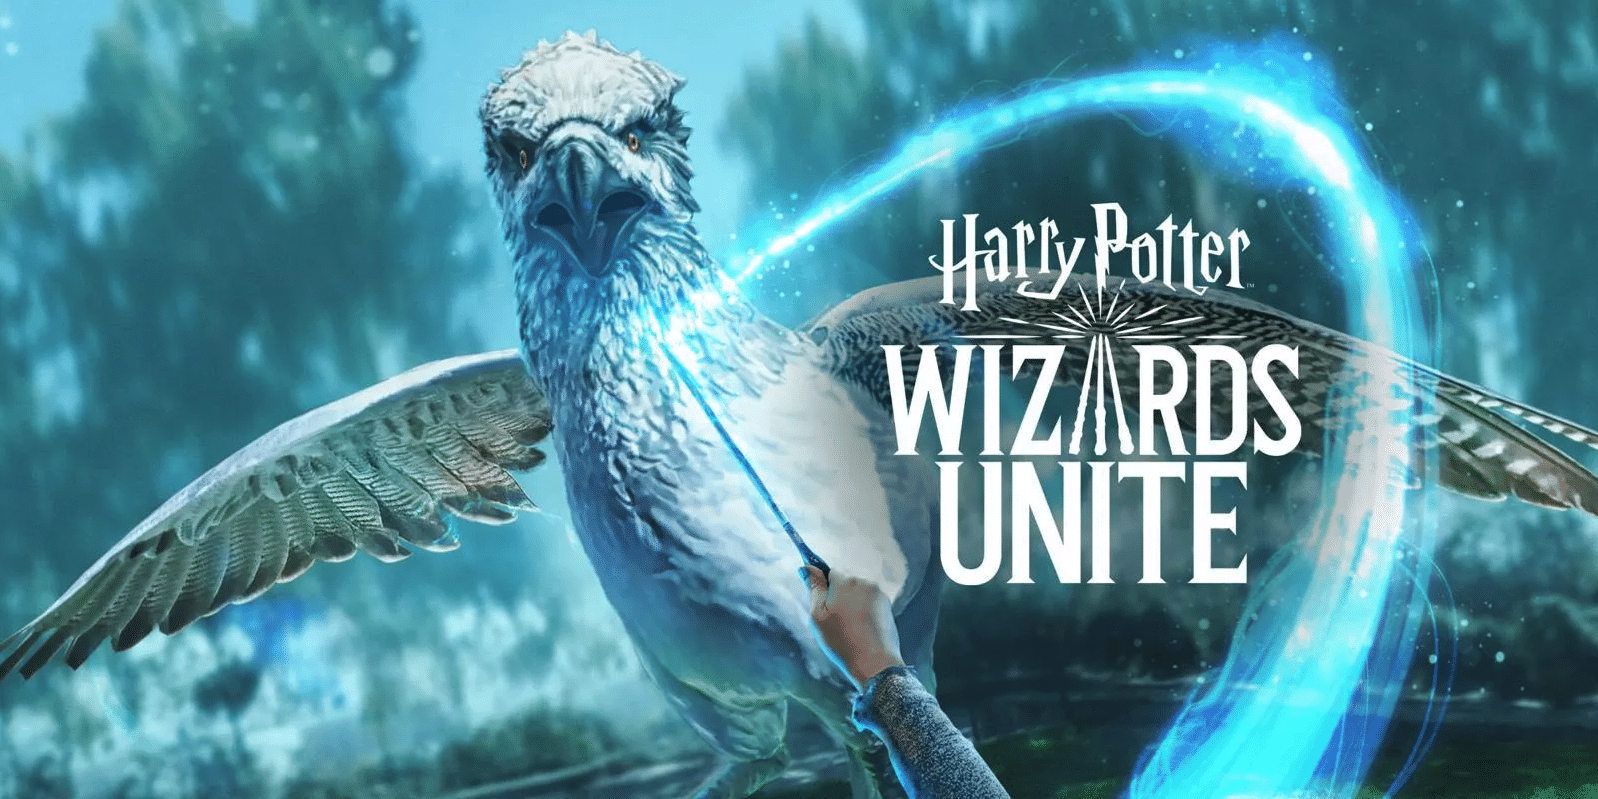 Harry Potter Wizards Unite Reaches 200K Downloads in First 24 Hours